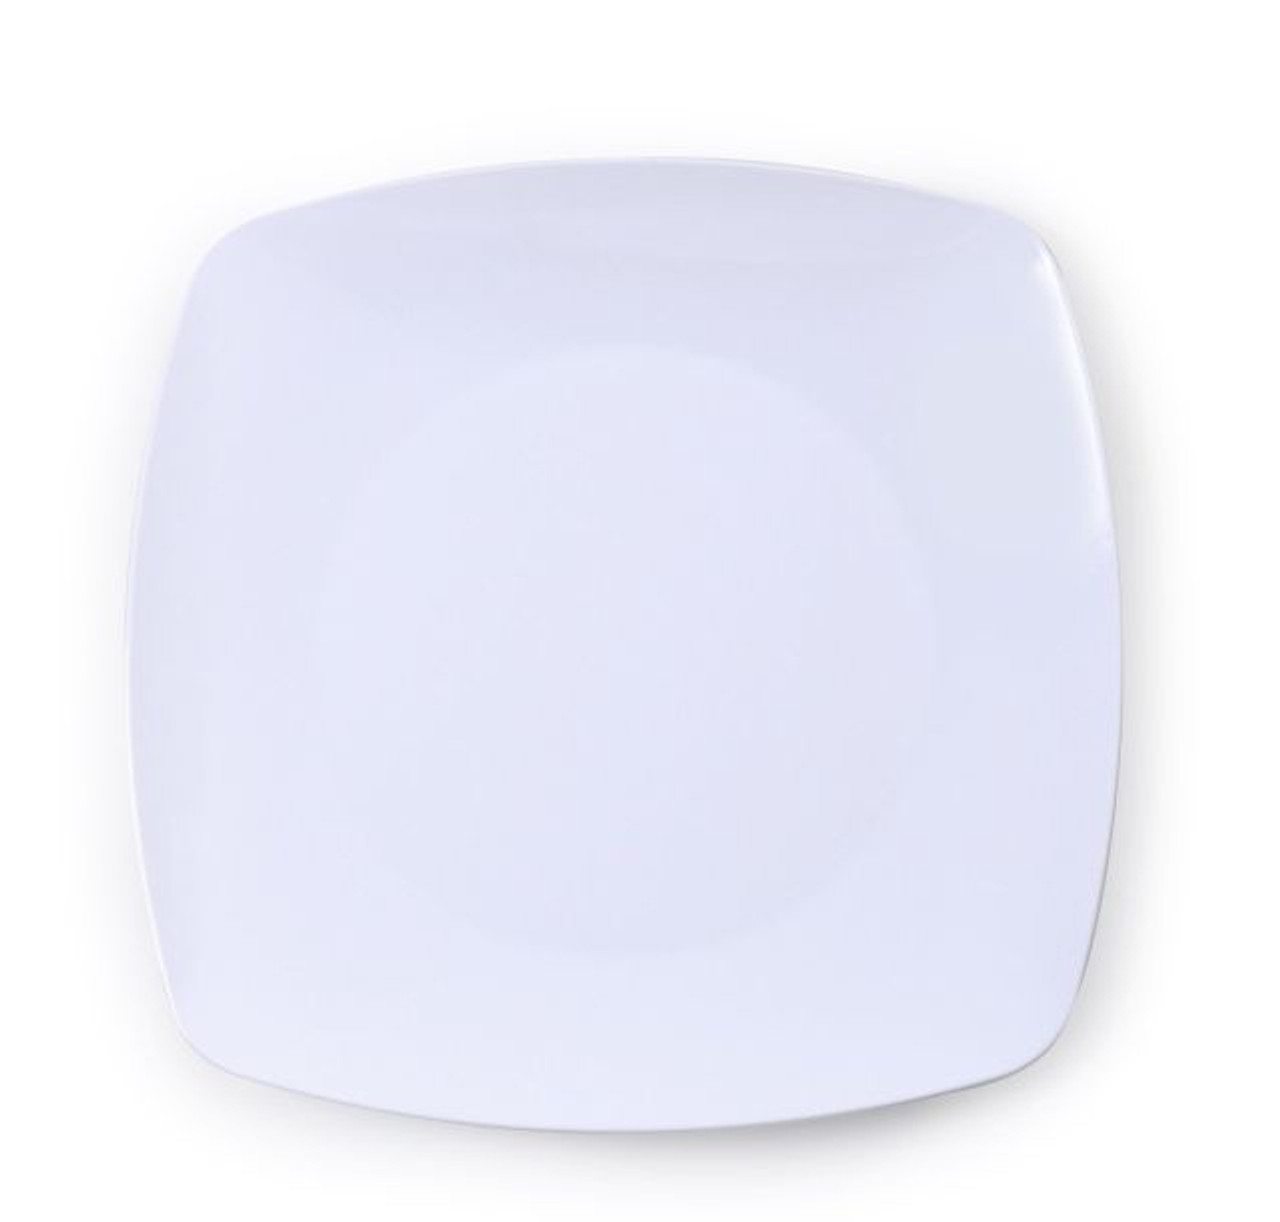 https://cdn11.bigcommerce.com/s-hgqmwywp99/images/stencil/1280x1280/products/51349/46127/renaissance-white-square-rounded-7-5-salad-plastic-plates-10ct-8__76480.1675880446.jpg?c=1?imbypass=on